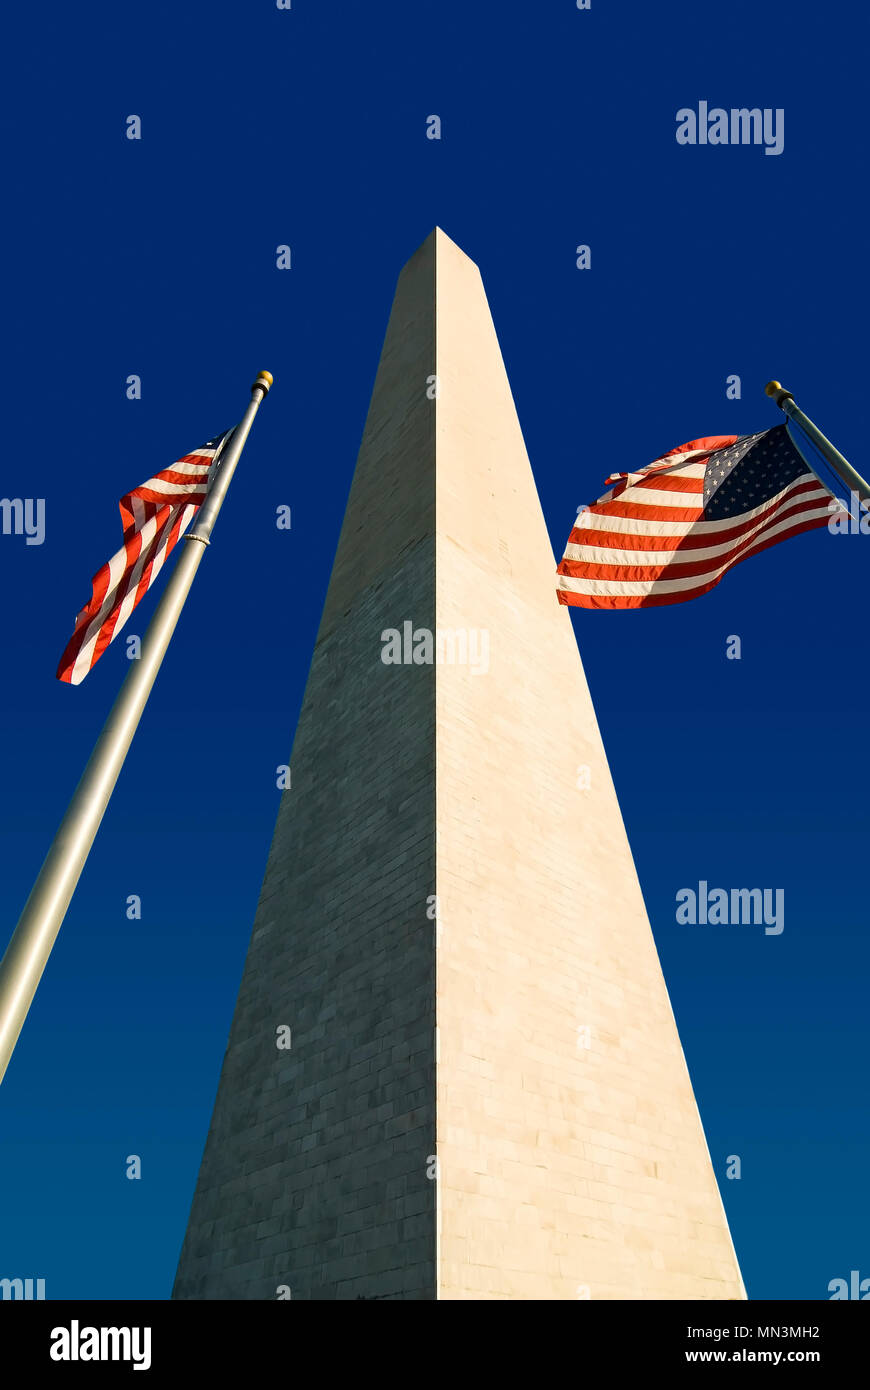 The Washington Monument  with two American flags. Located in Washington DC along the National Mall. Stock Photo